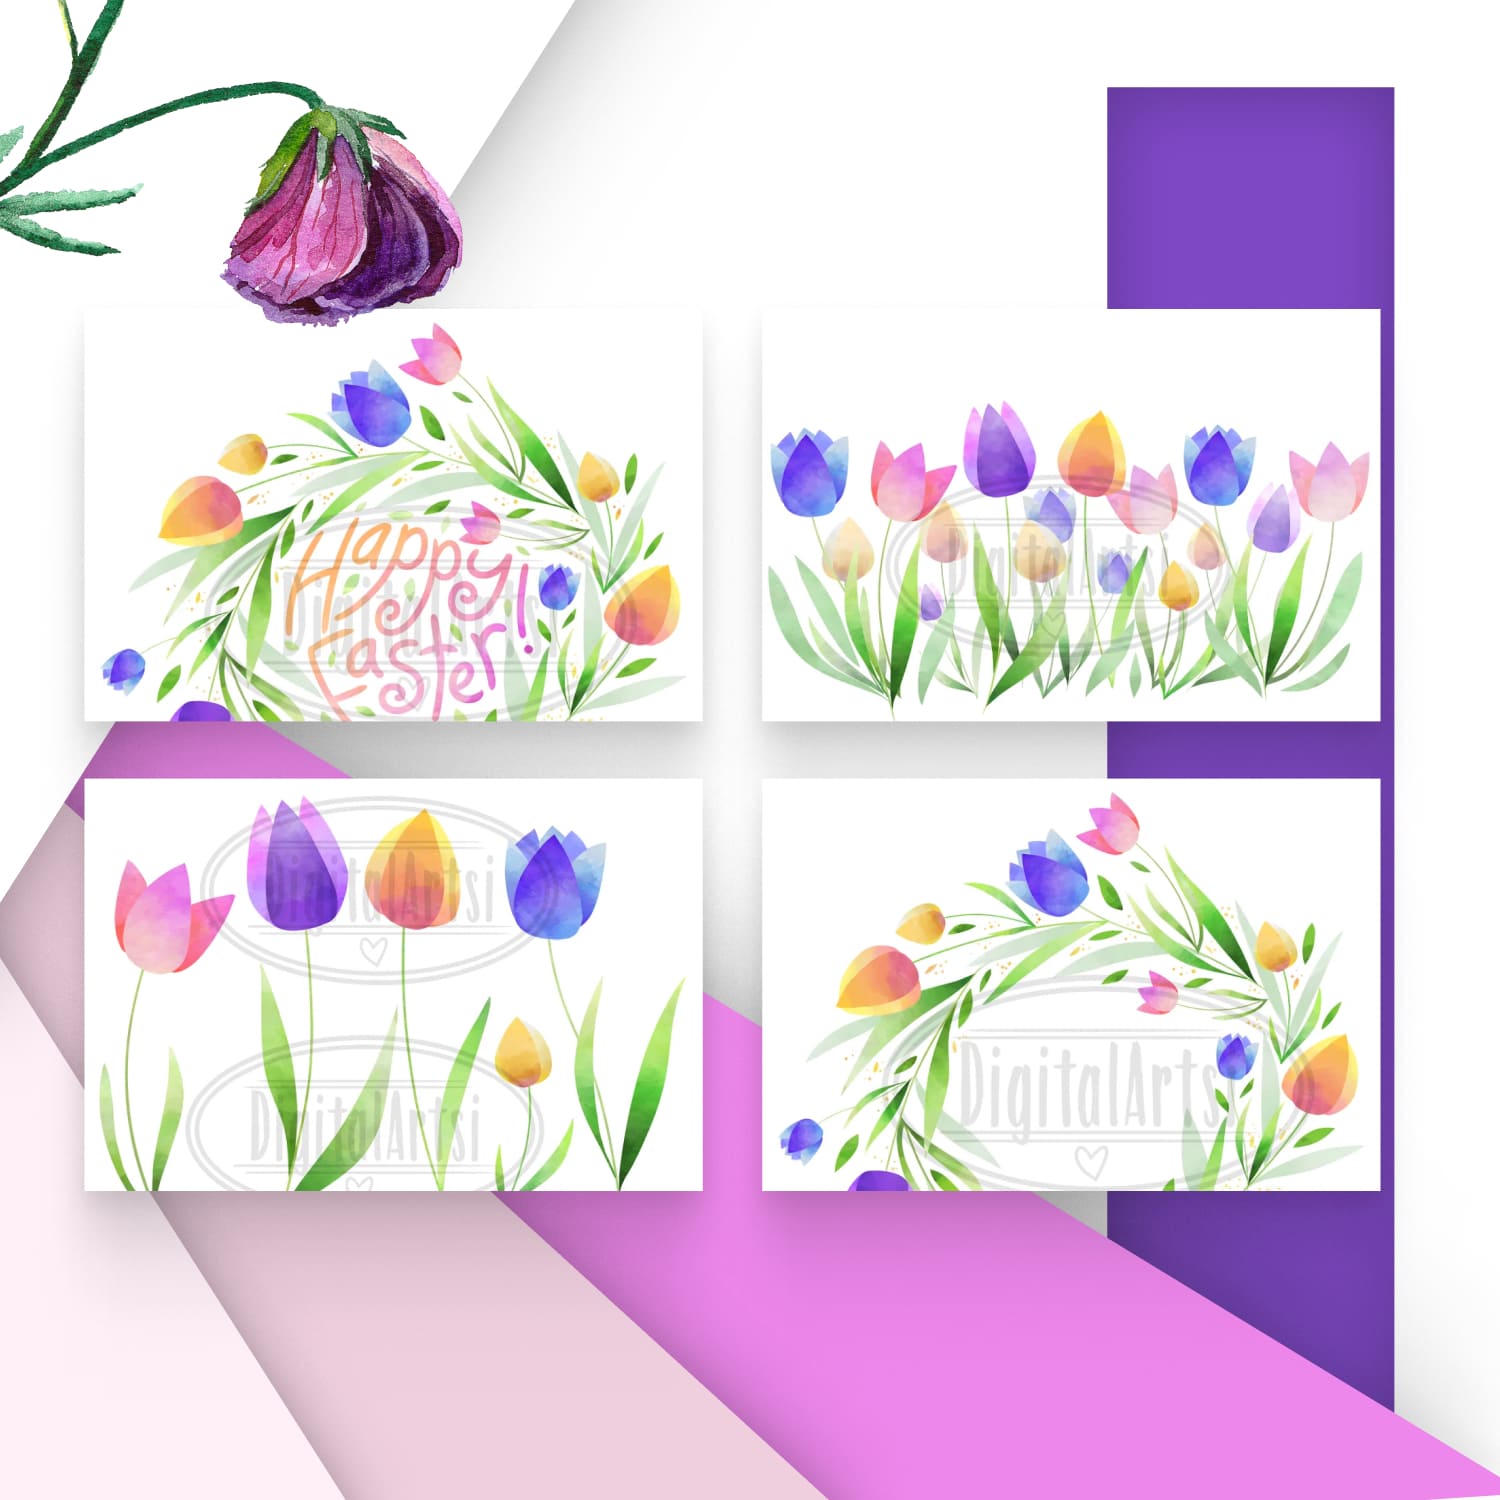 Watercolor Tulips Clipart cover.